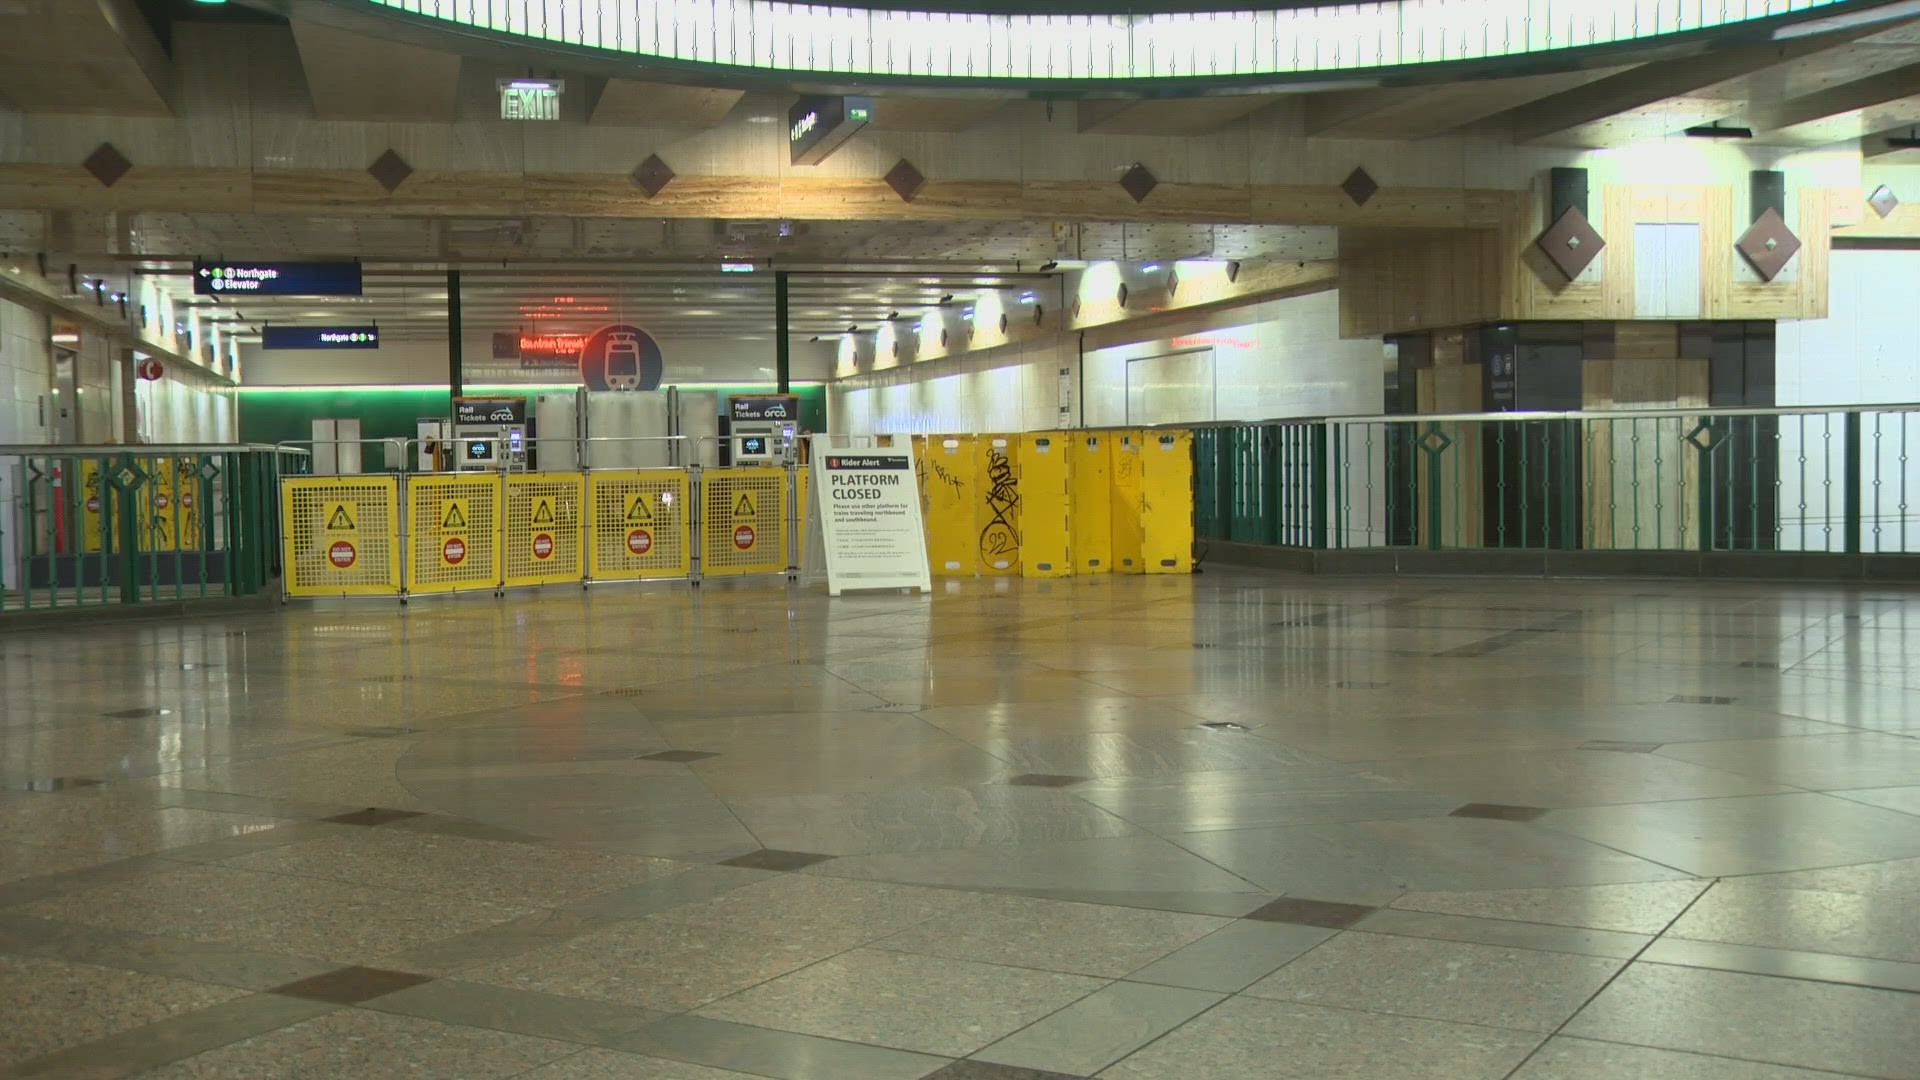 Only one train is running at a time through the downtown Seattle tunnel until further notice due to damage sustained to the Westlake Station during construction.